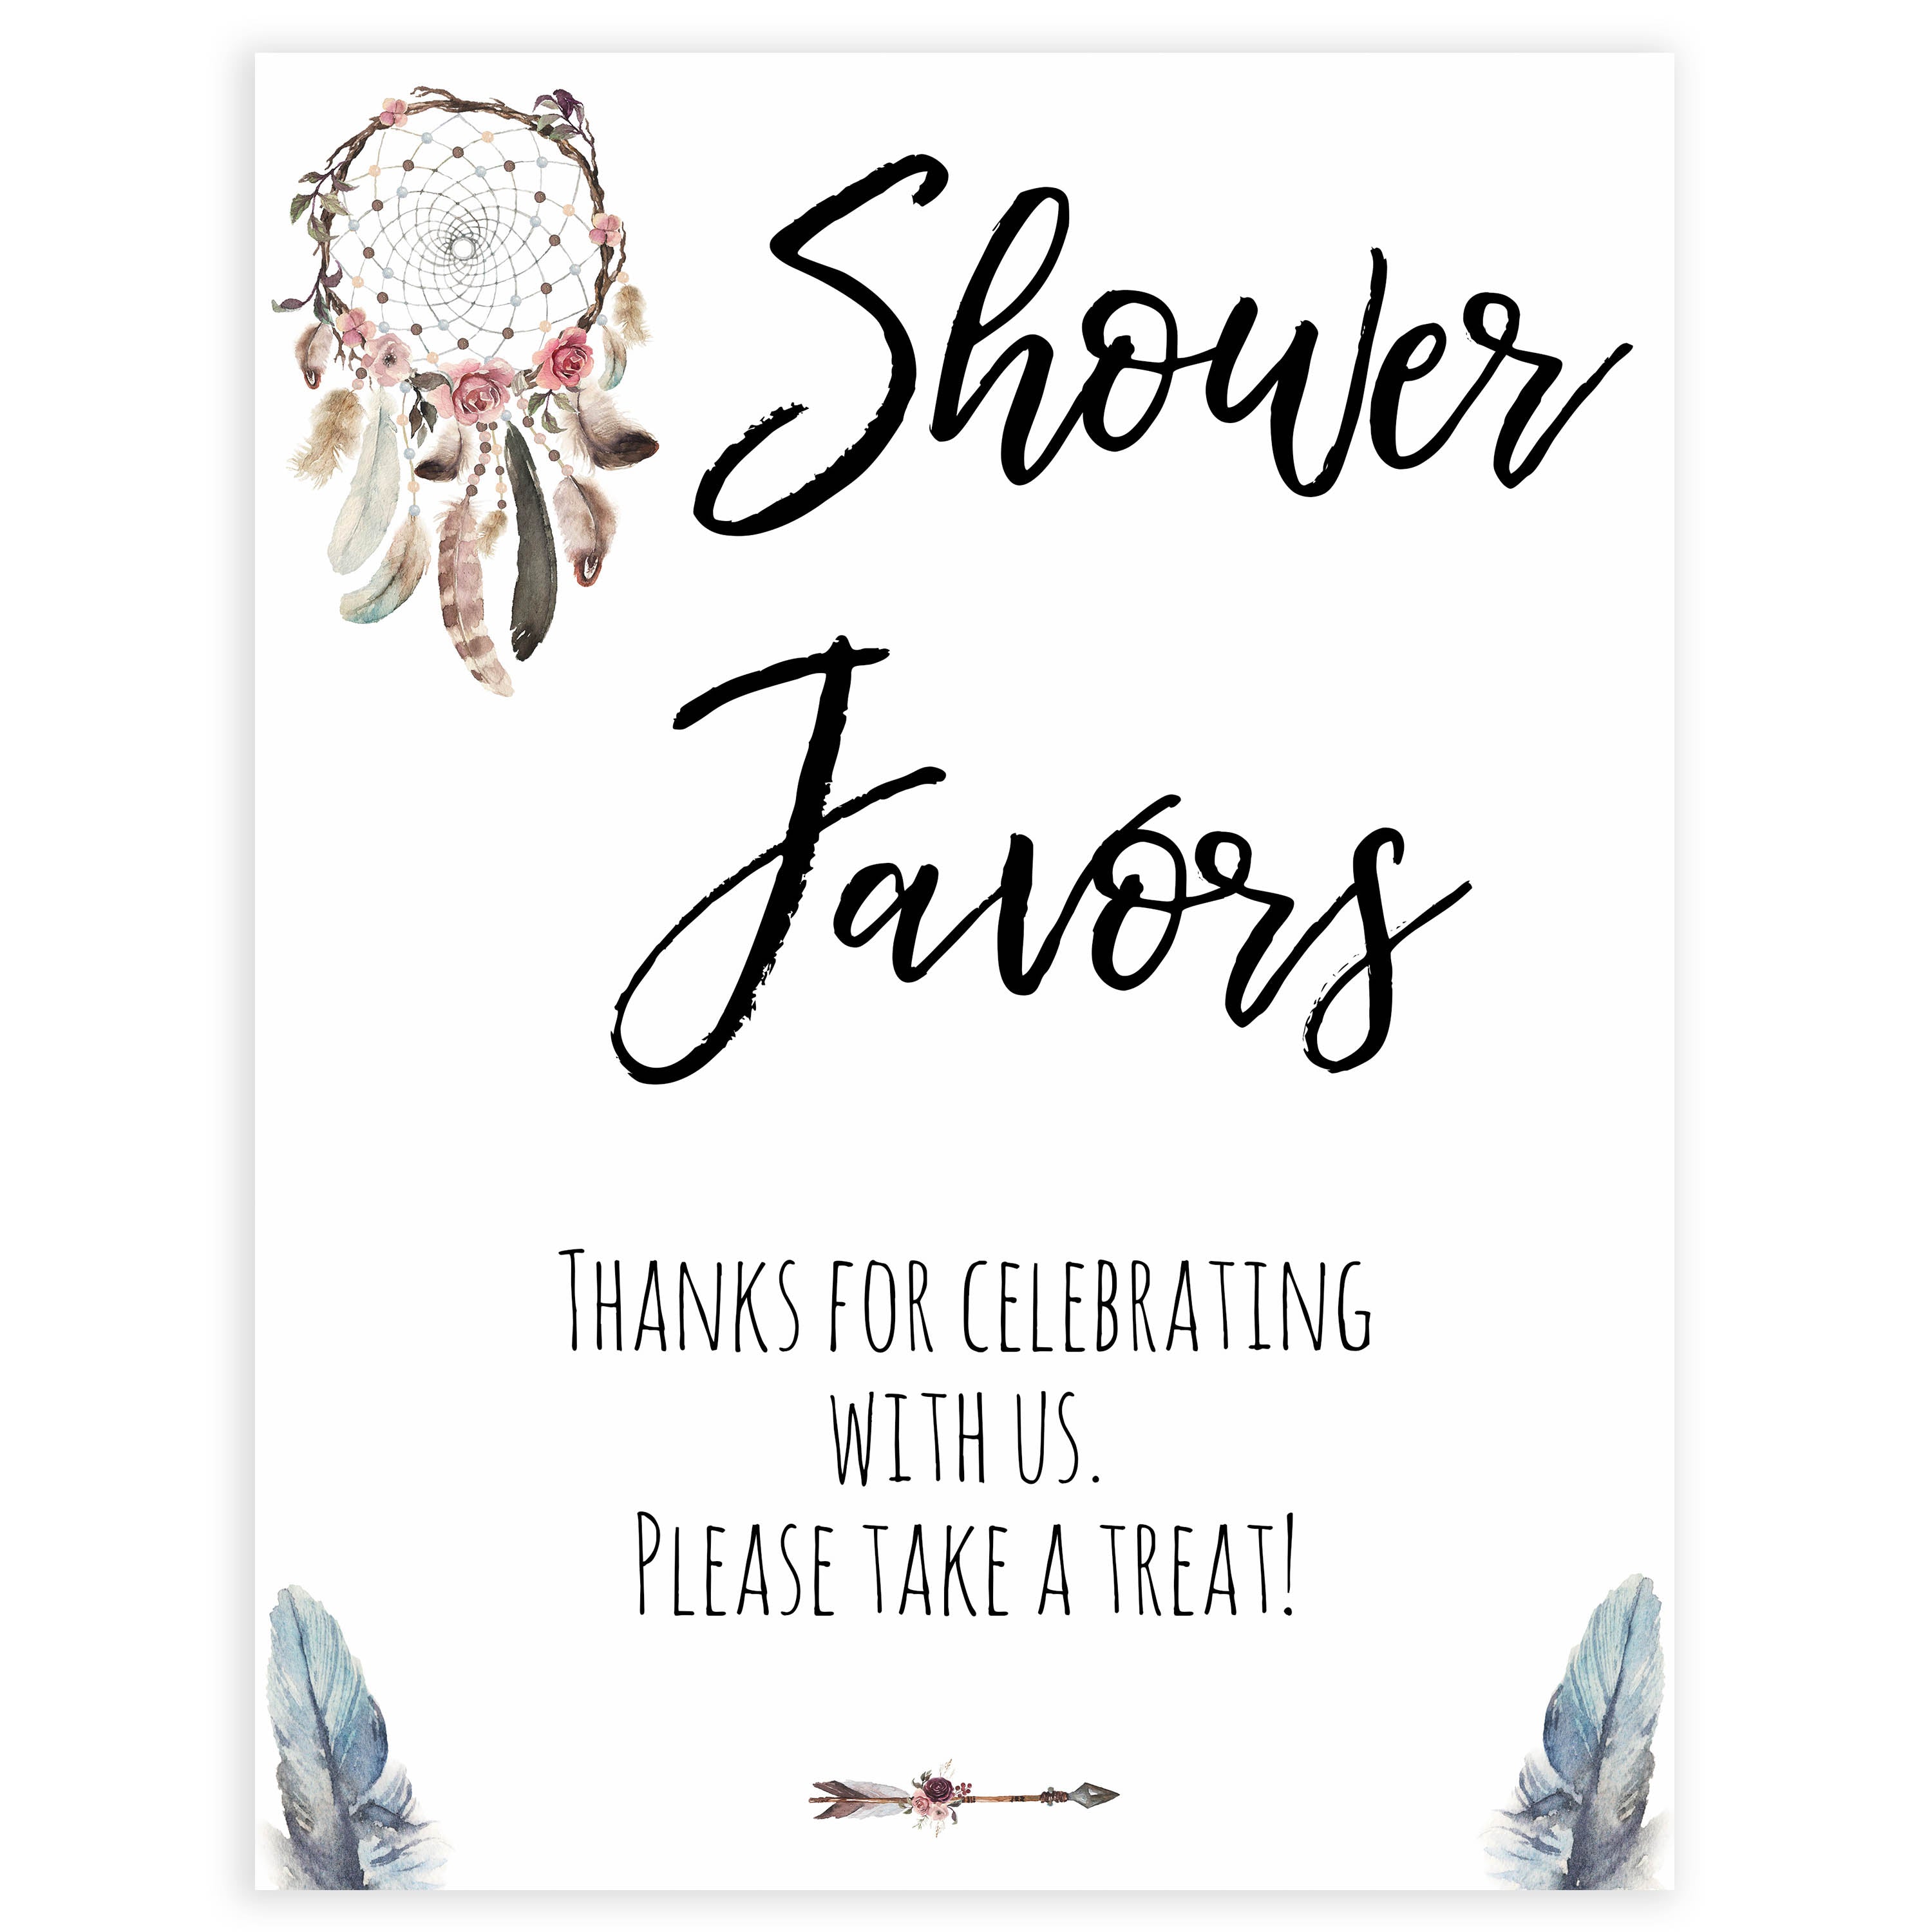 boho baby signs, shower favours, favor baby signs, printable baby signs, boho baby decor, fun baby signs, baby shower signs, baby shower decor